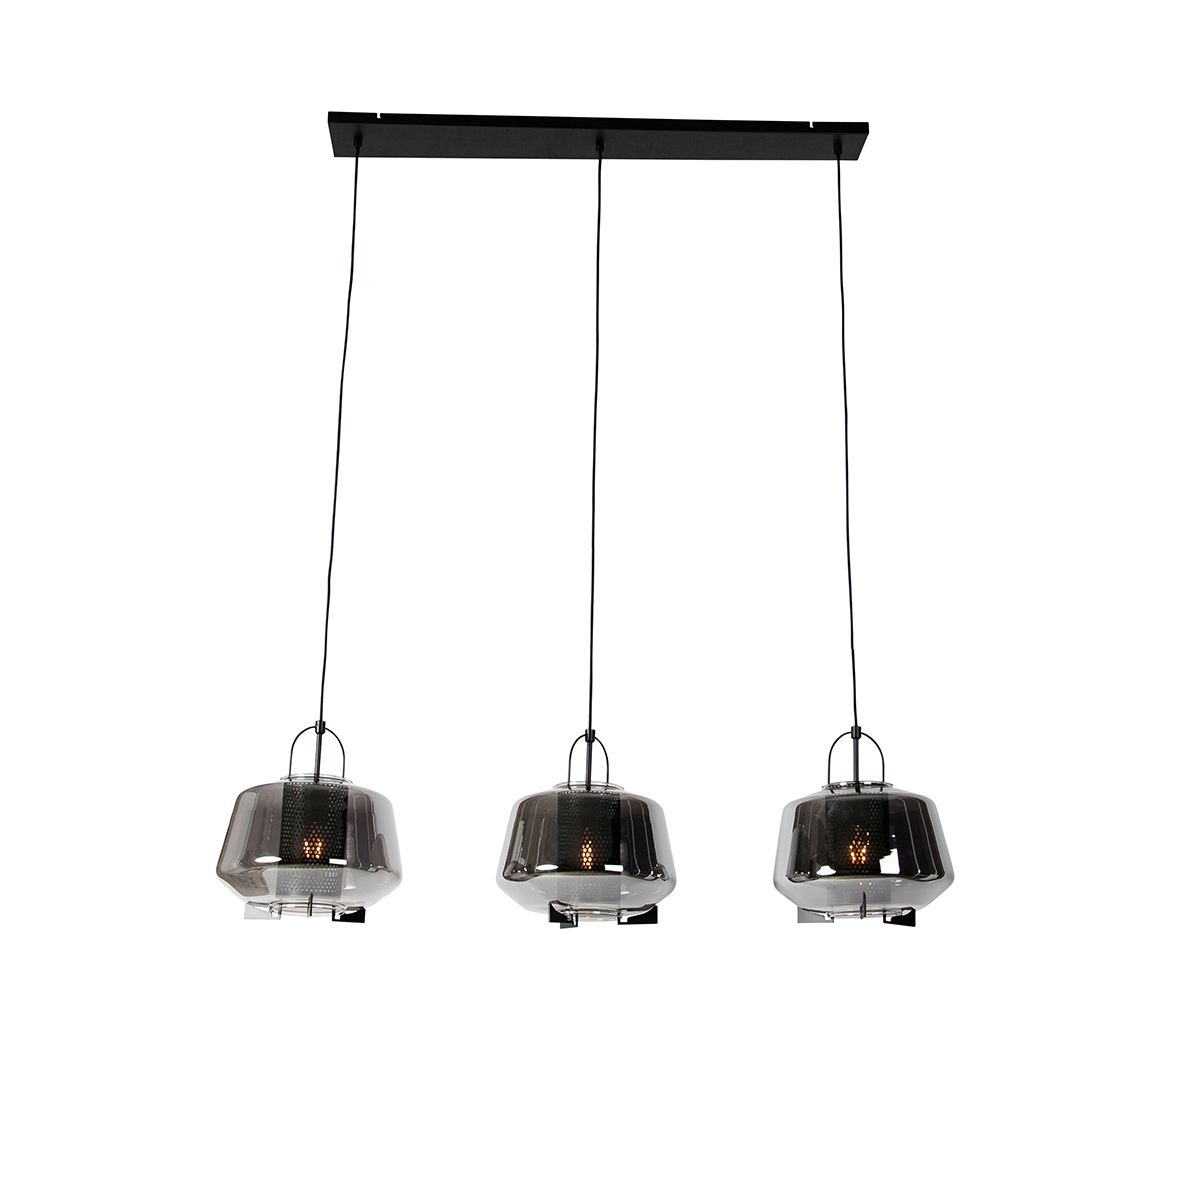 Hanging lamp black with smoke glass 30 cm oblong 3-light - Kevin